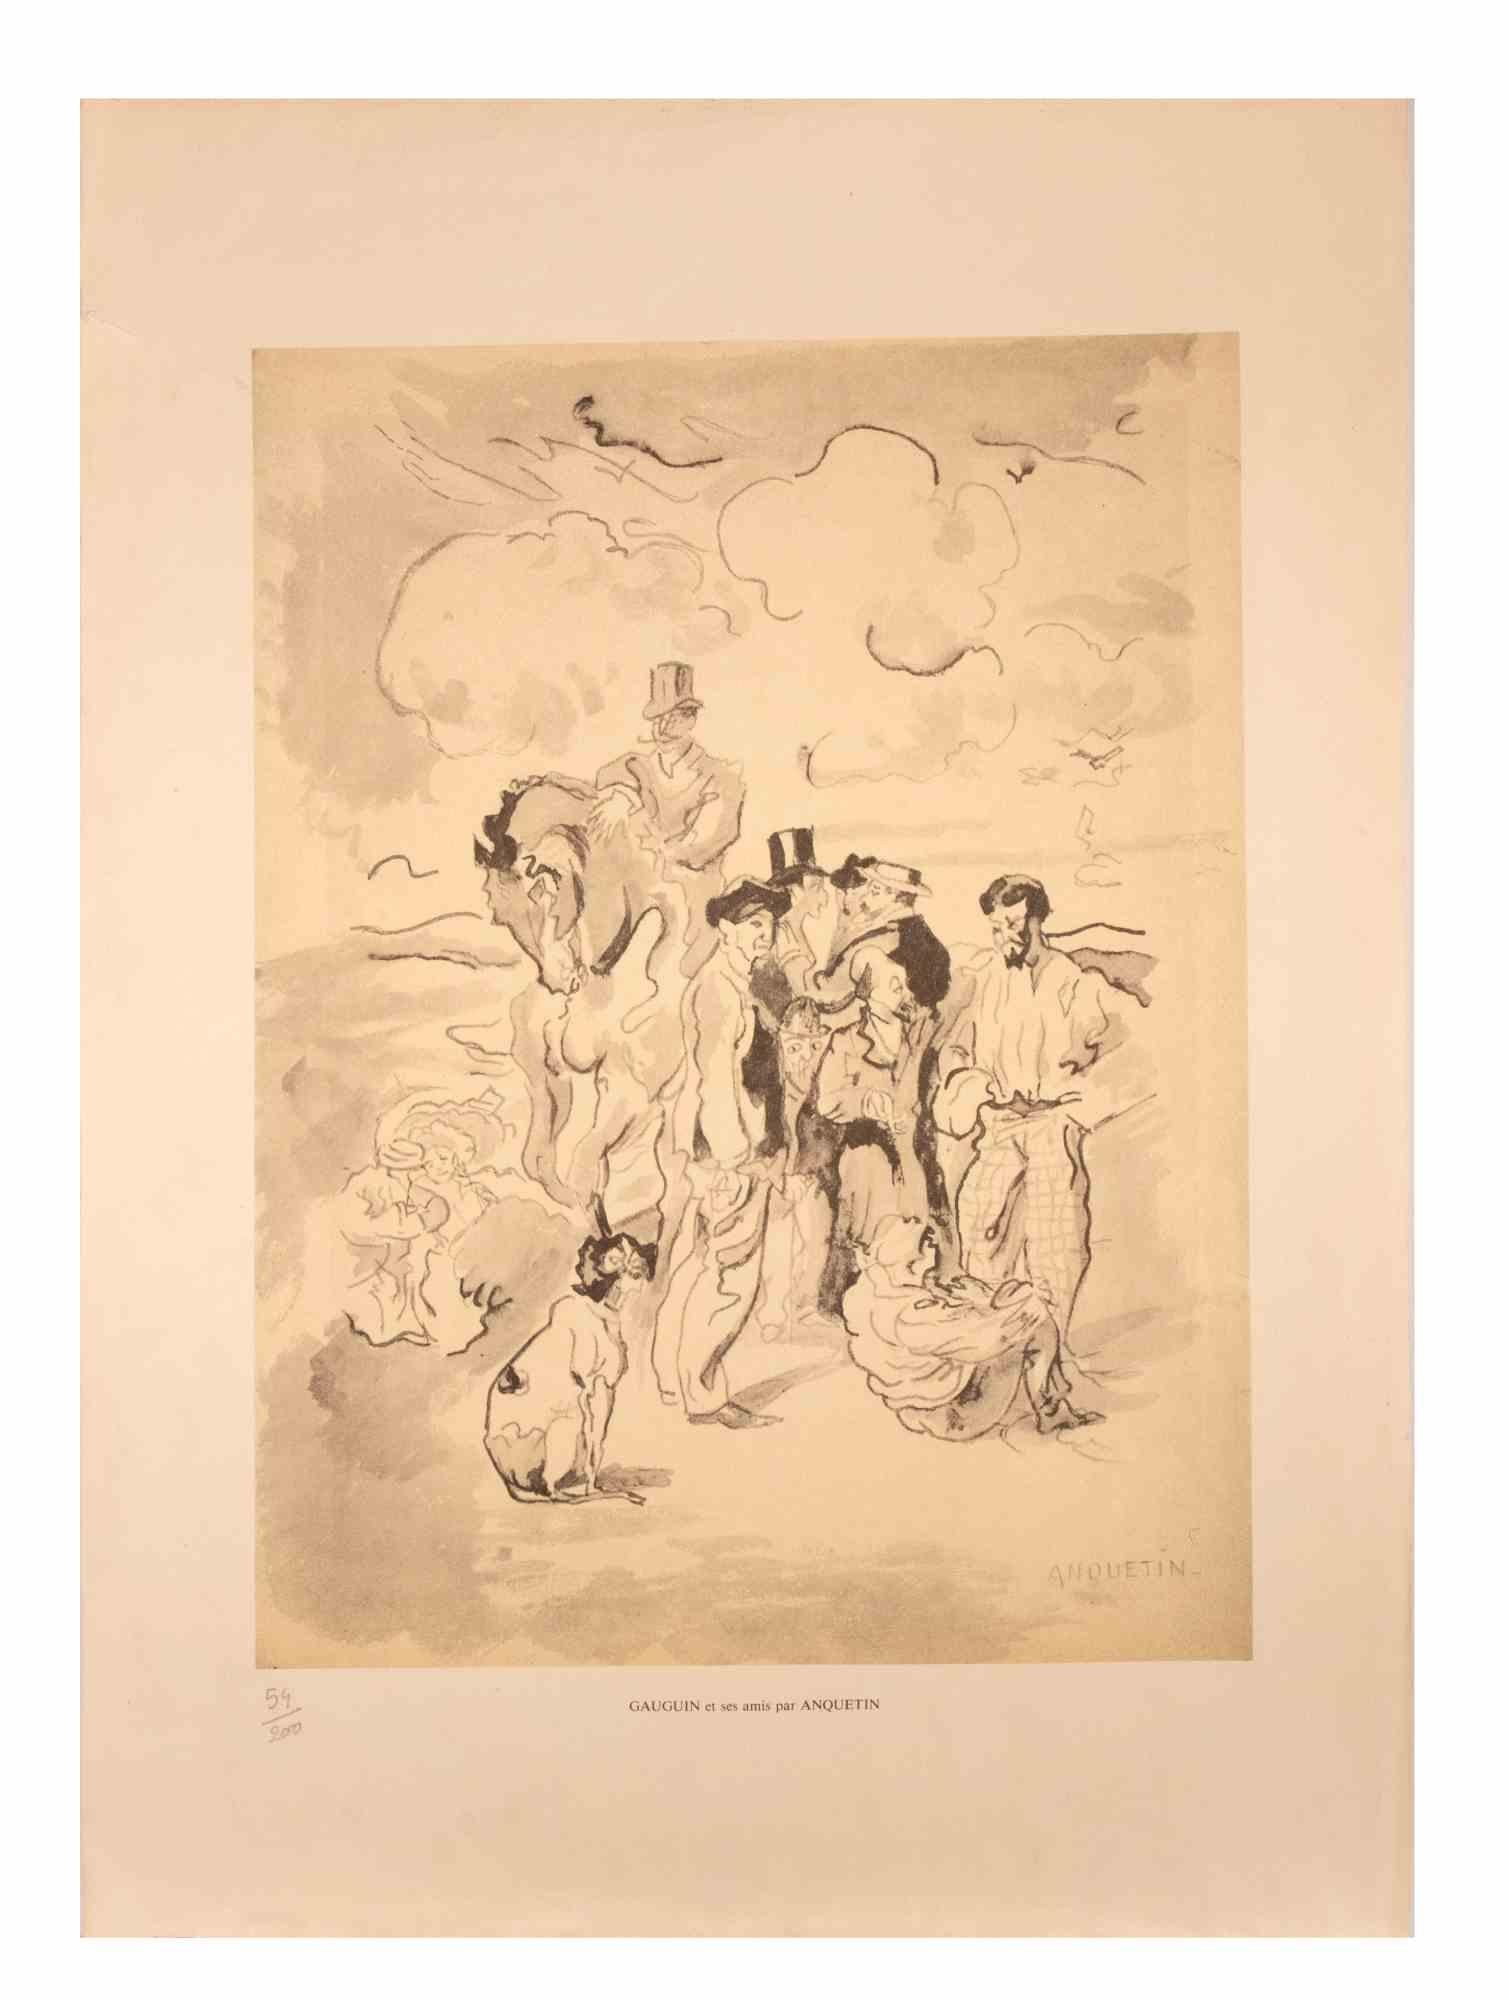 Gauguin et Ses Amis is a Lithograph realized by Louis Anquetin (1861-1932).

Good condition on a yellowed paper.

Signed , titled ancd numbered on the lower margin.

Louis Émile Anquetin (26 January 1861 – 19 August 1932) was a French painter. In